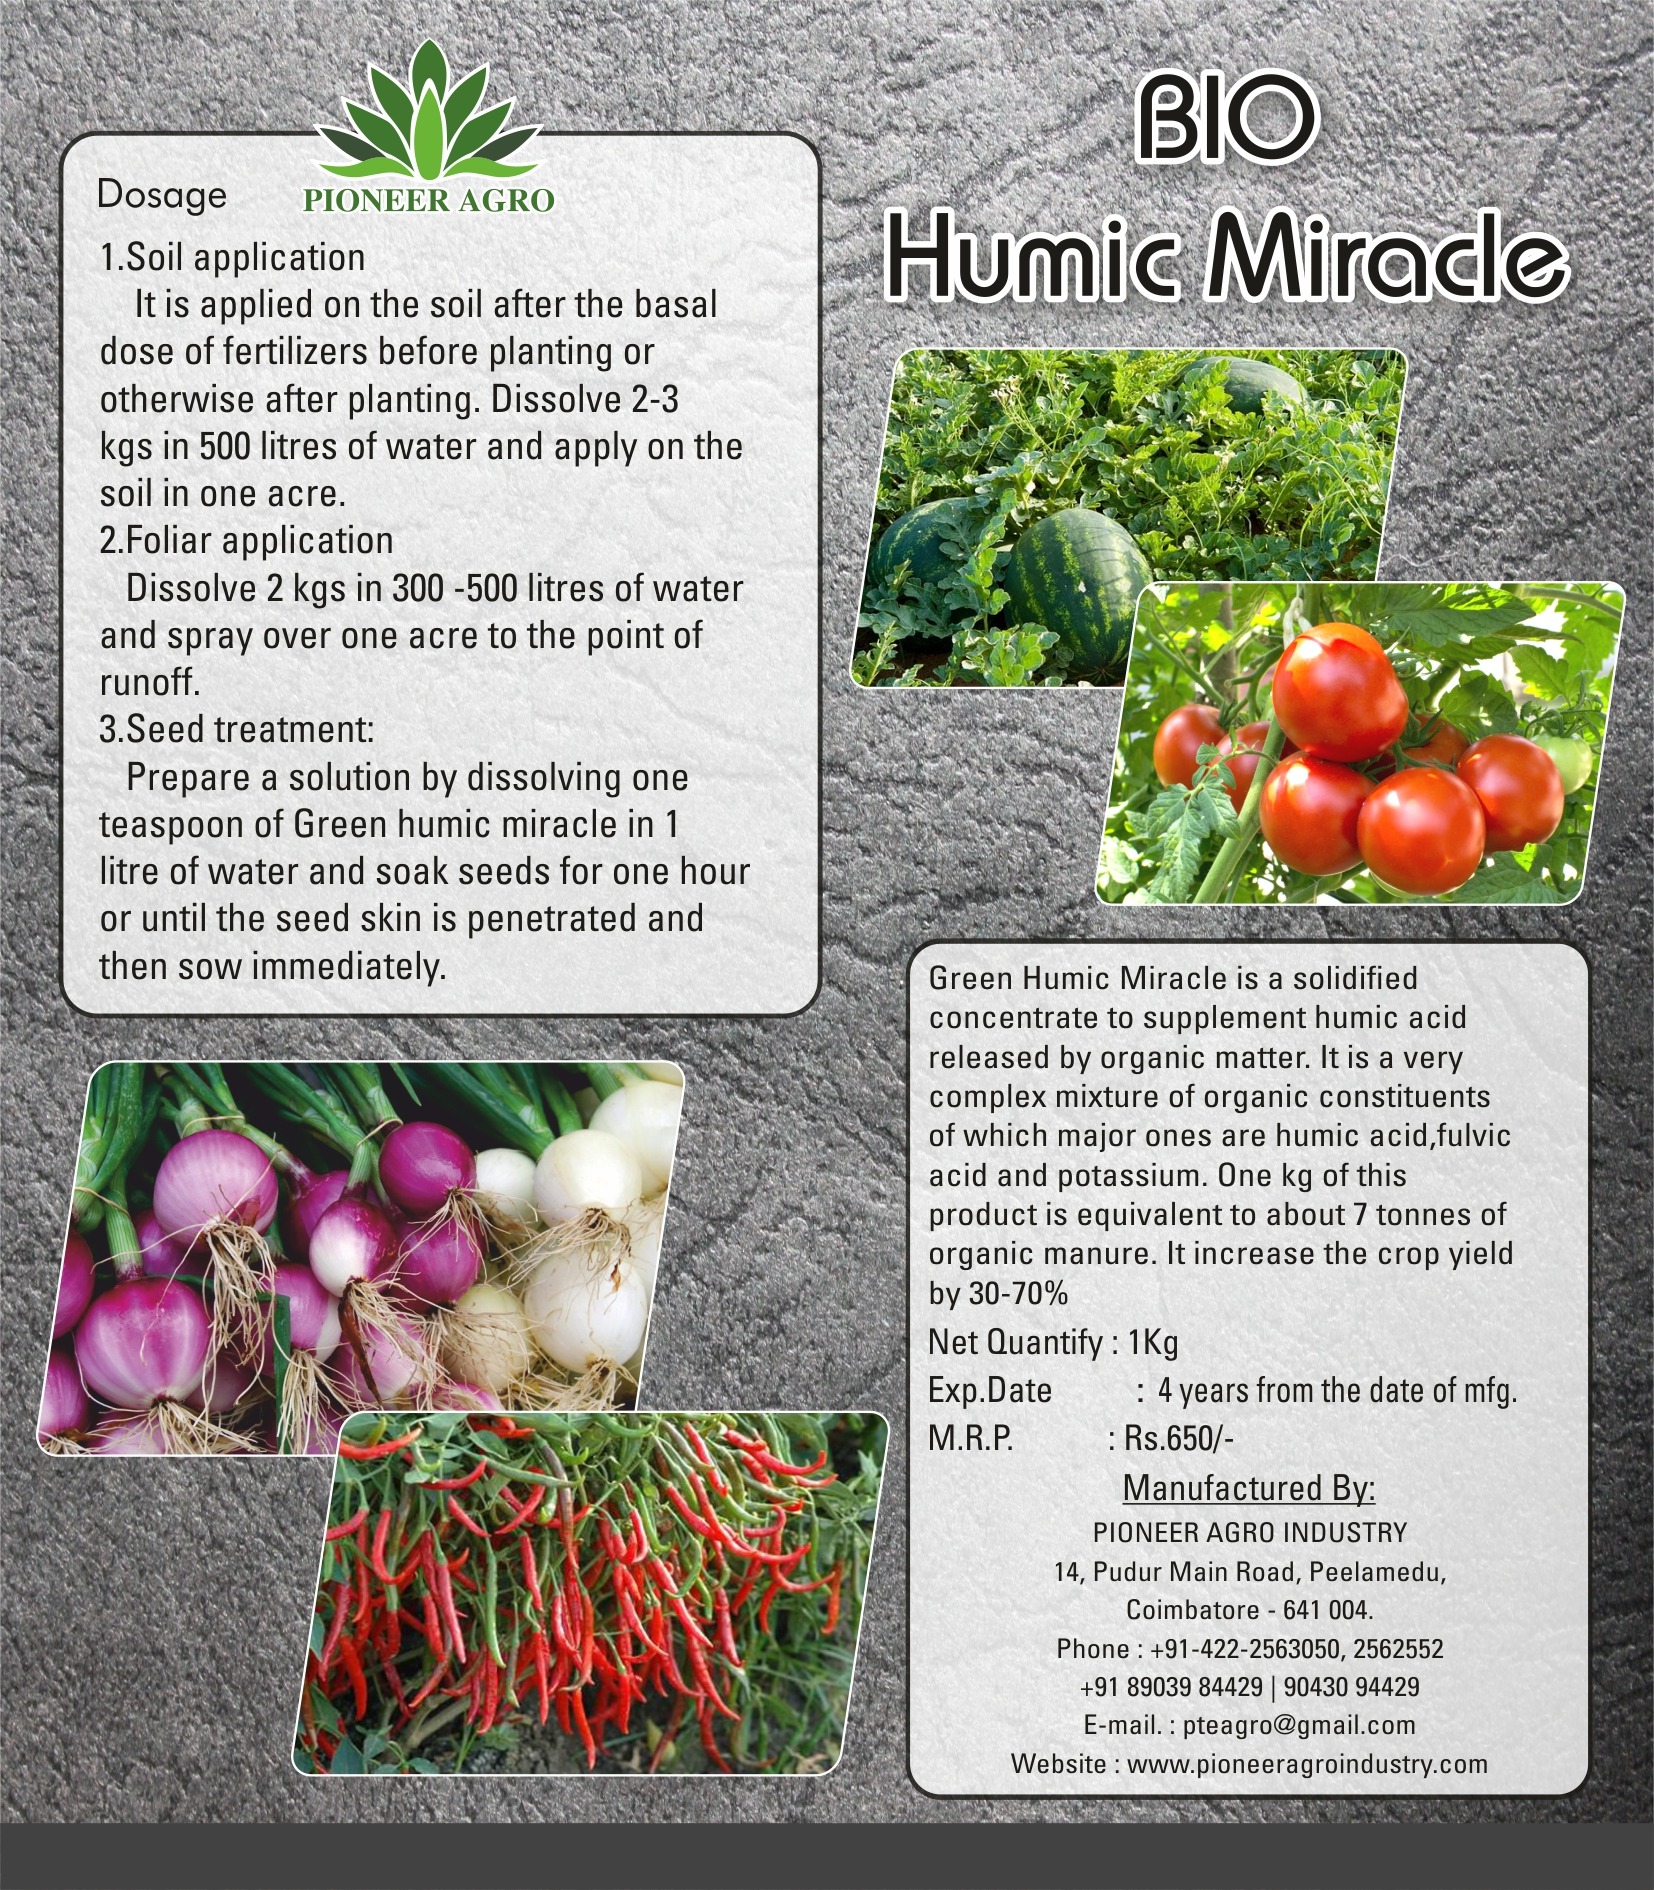 Bio Humic Miracle for Plant Growth